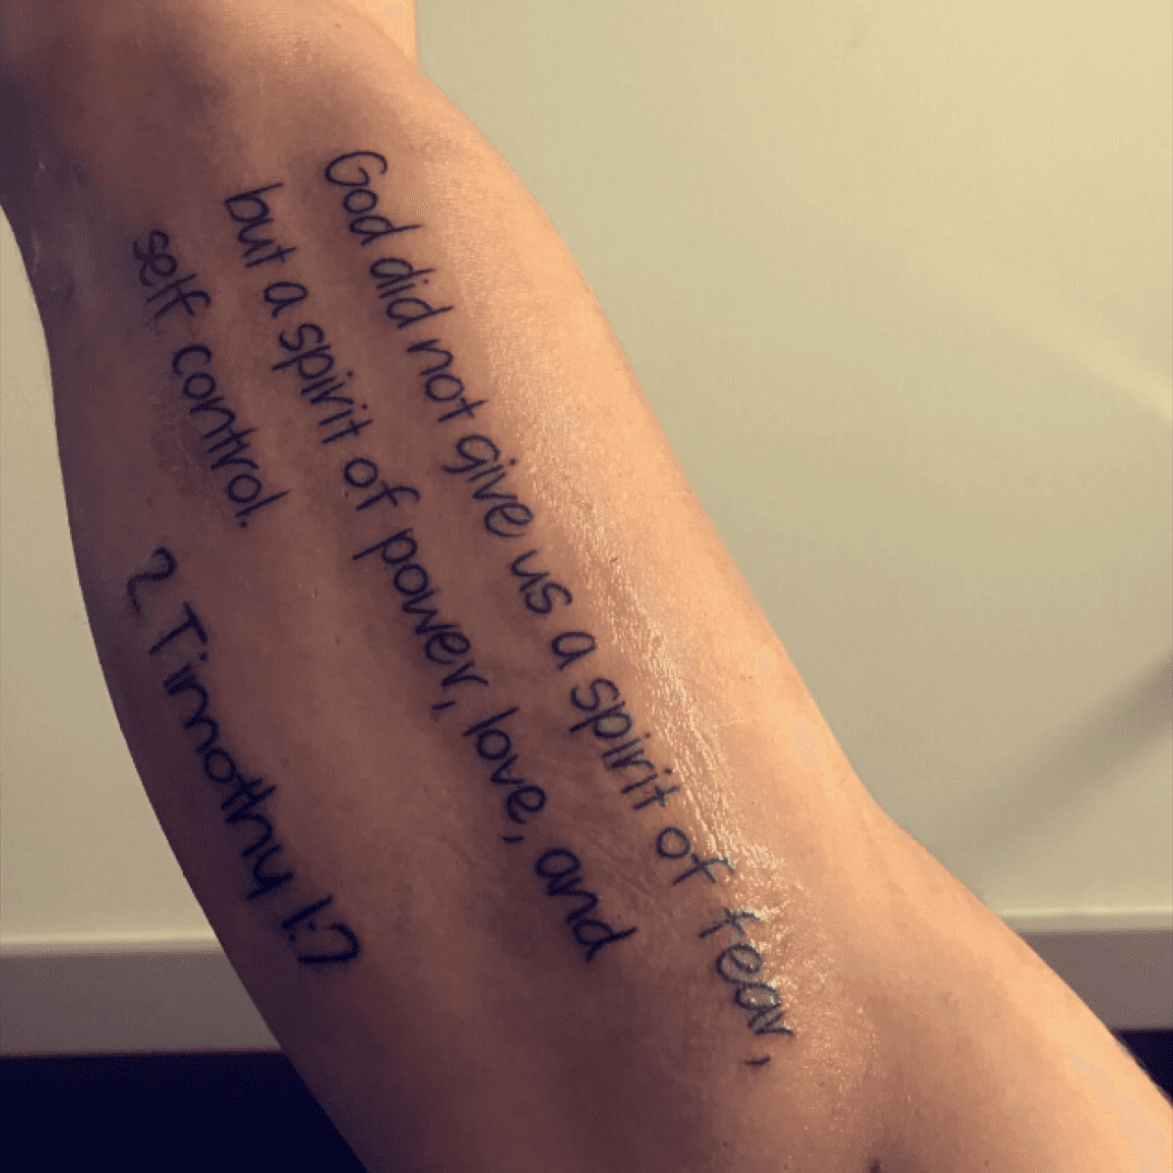 20 Simple Quote Tattoo Ideas for Women - Mom's Got the Stuff